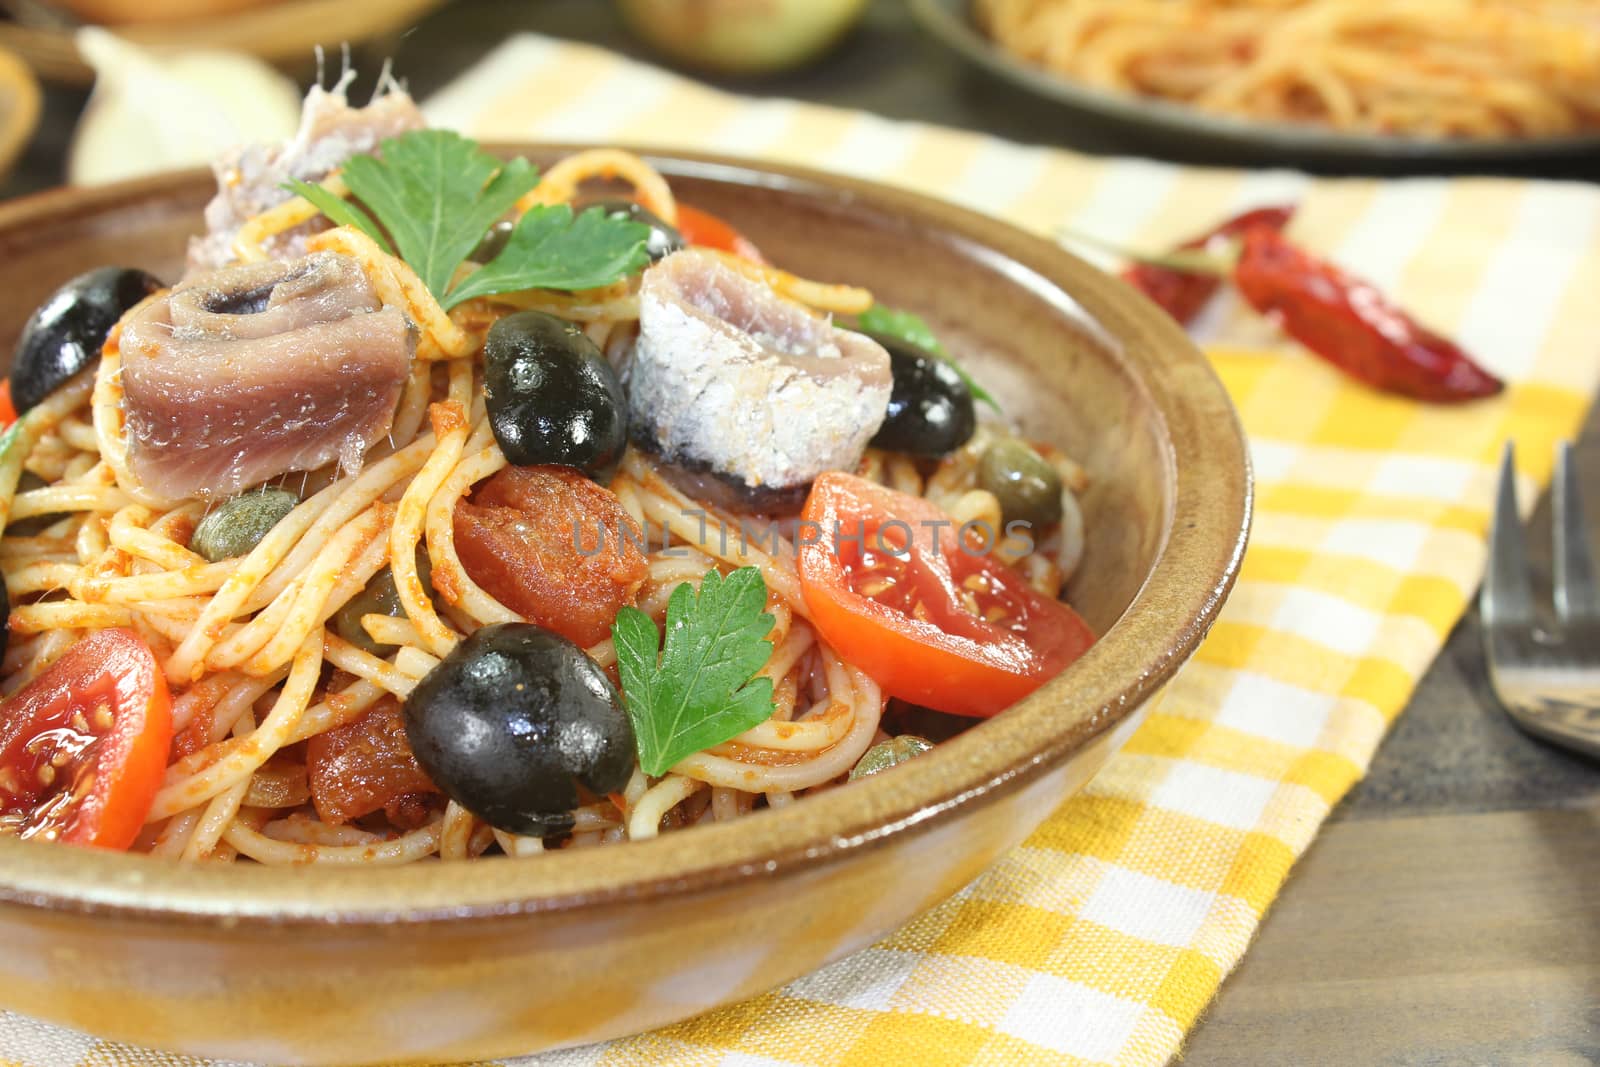 Spaghetti alla puttanesca with olives and tomatoes by discovery